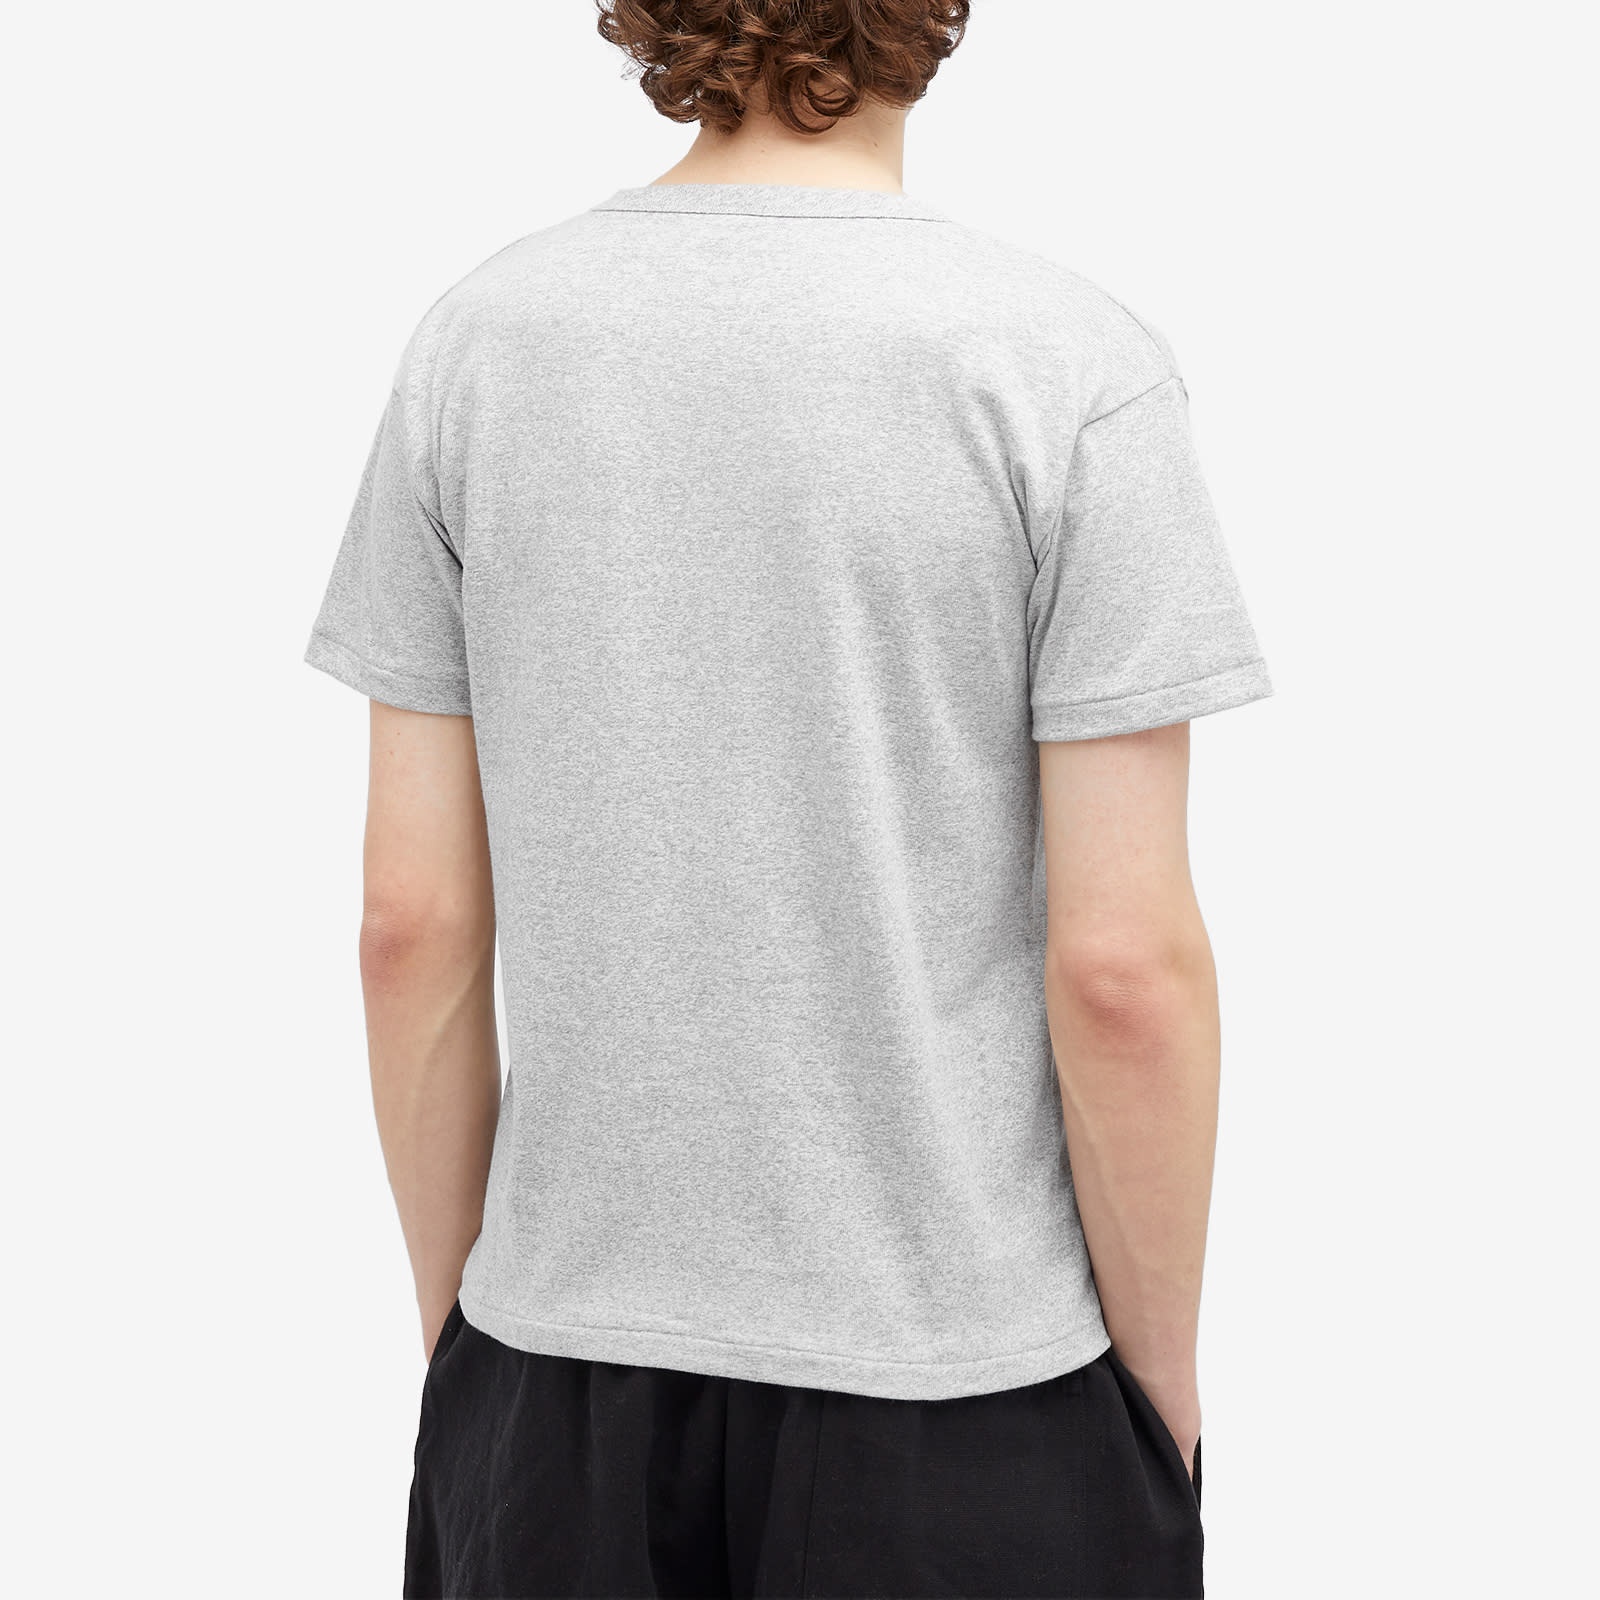 Champion Made in Japan T-Shirt - 3